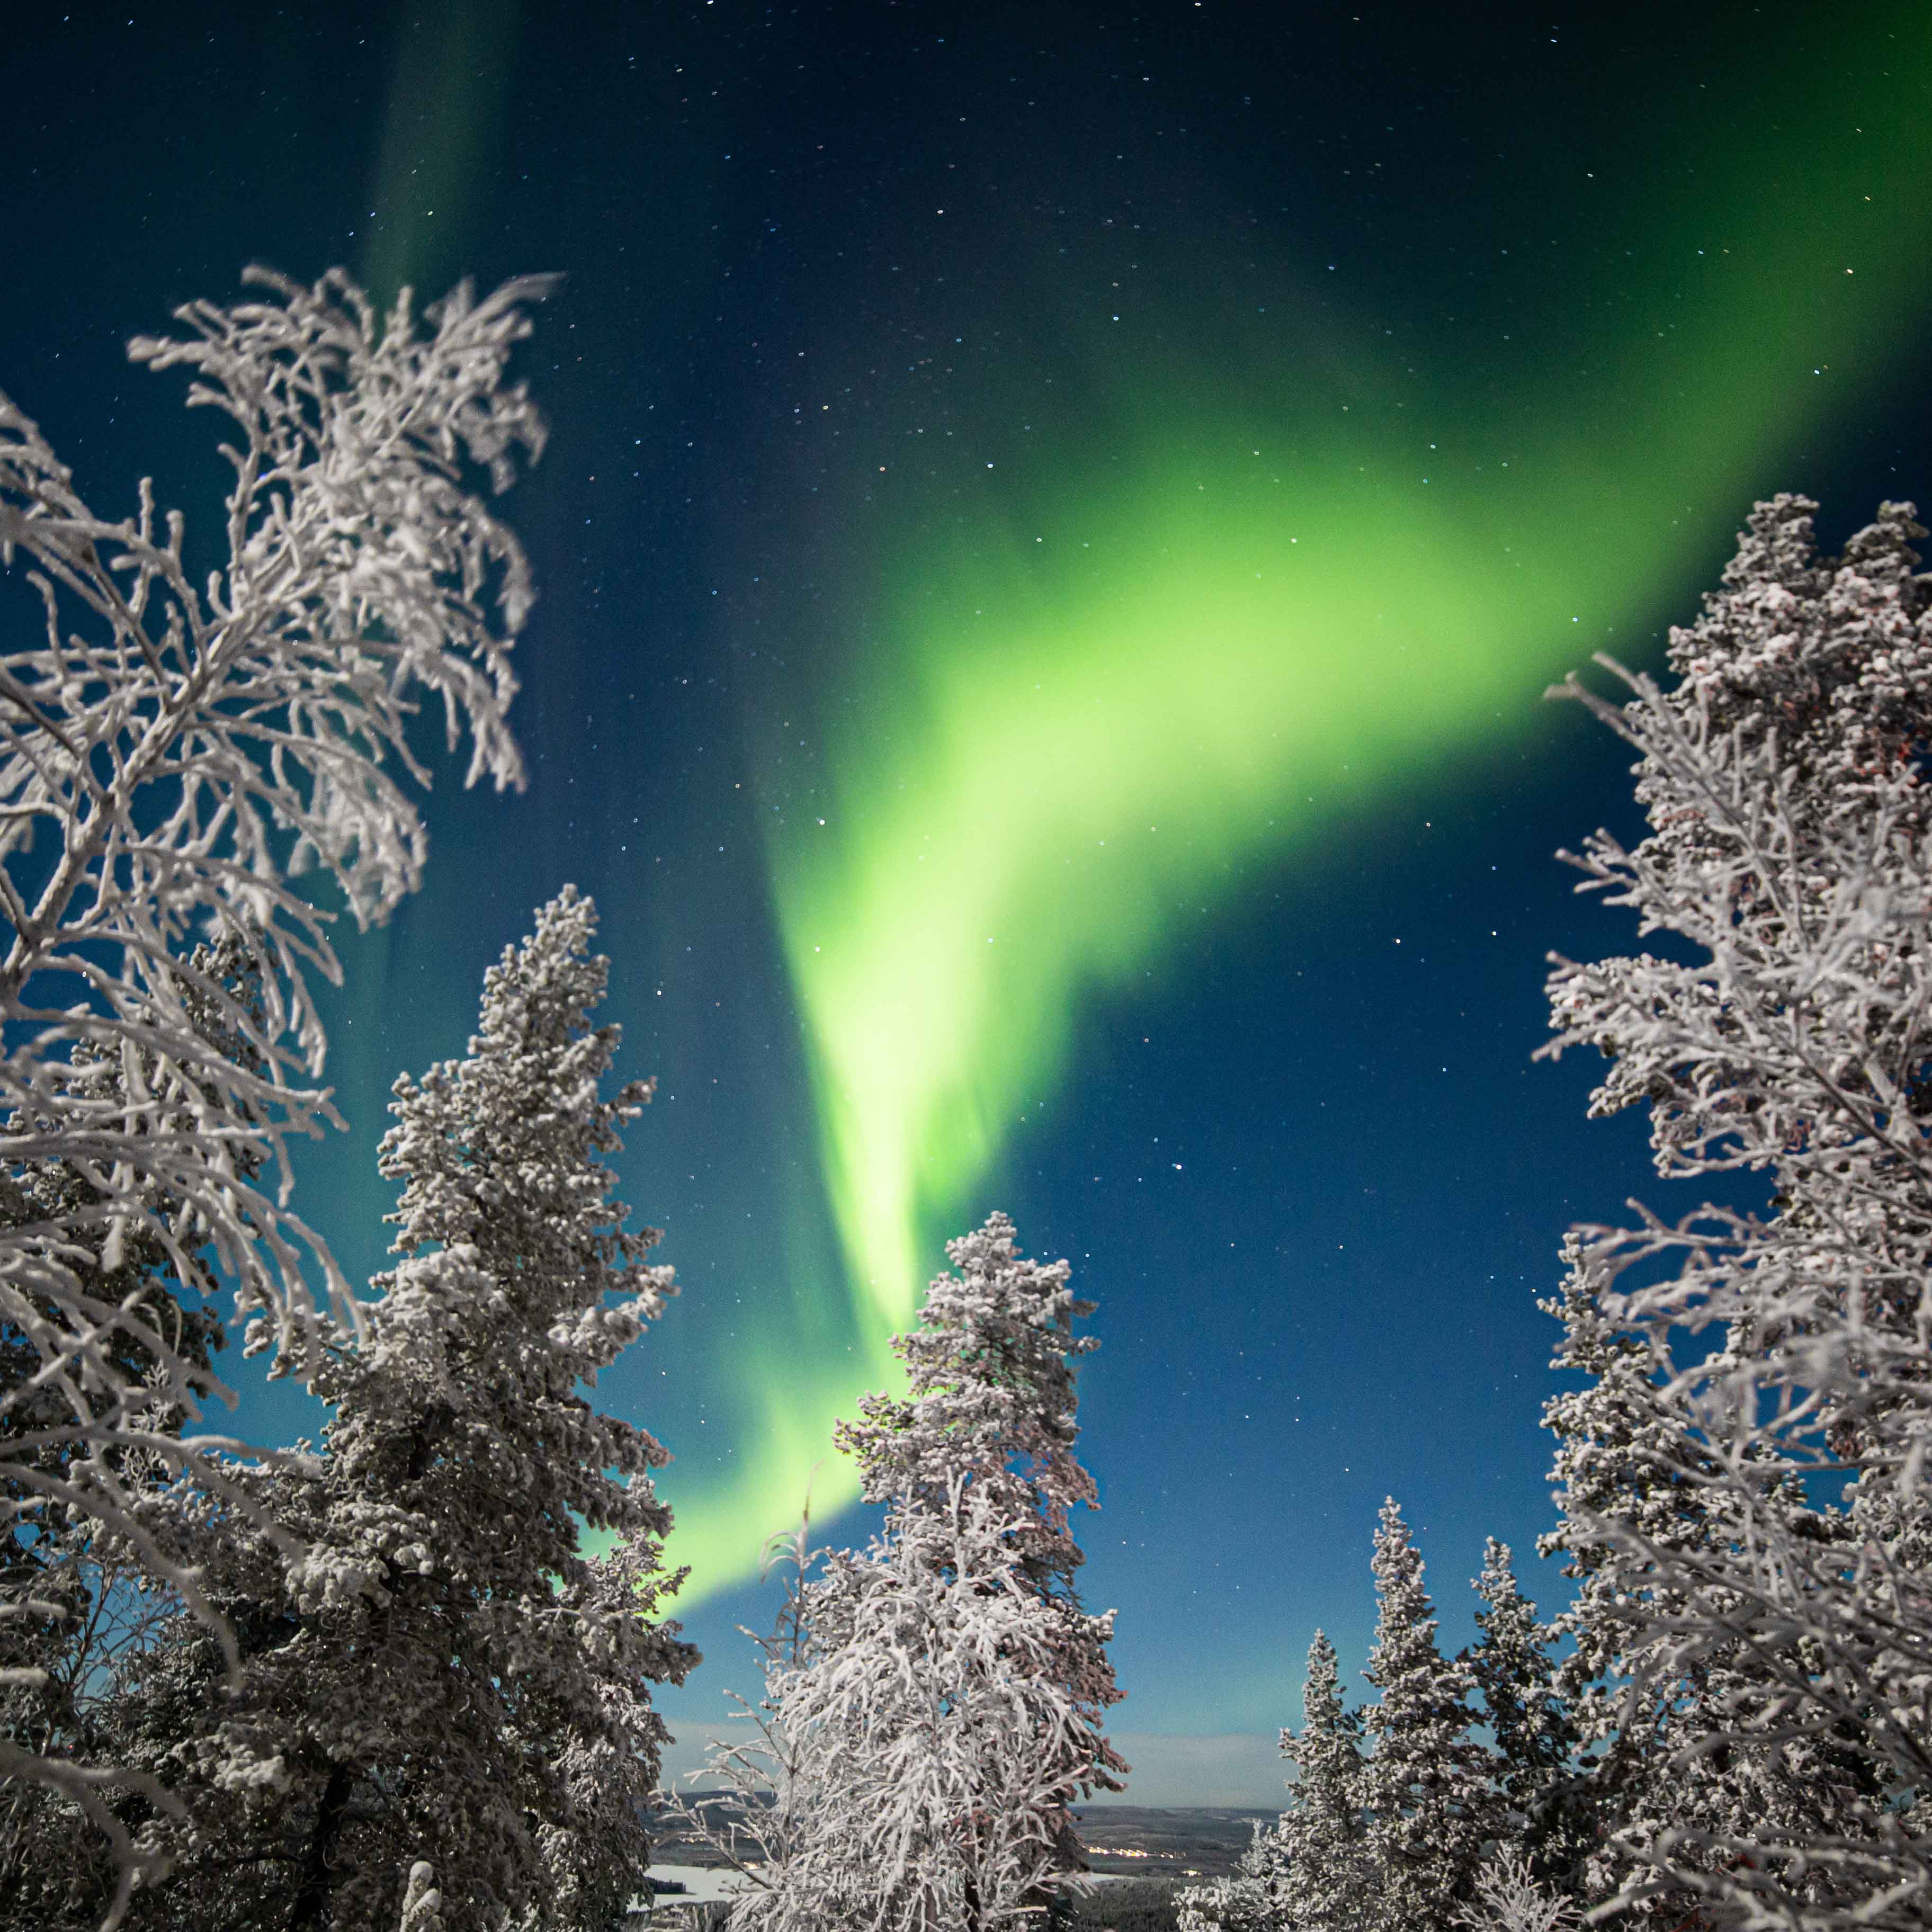 Northern Lights dancing through the northern sky in quiet snowy forest.